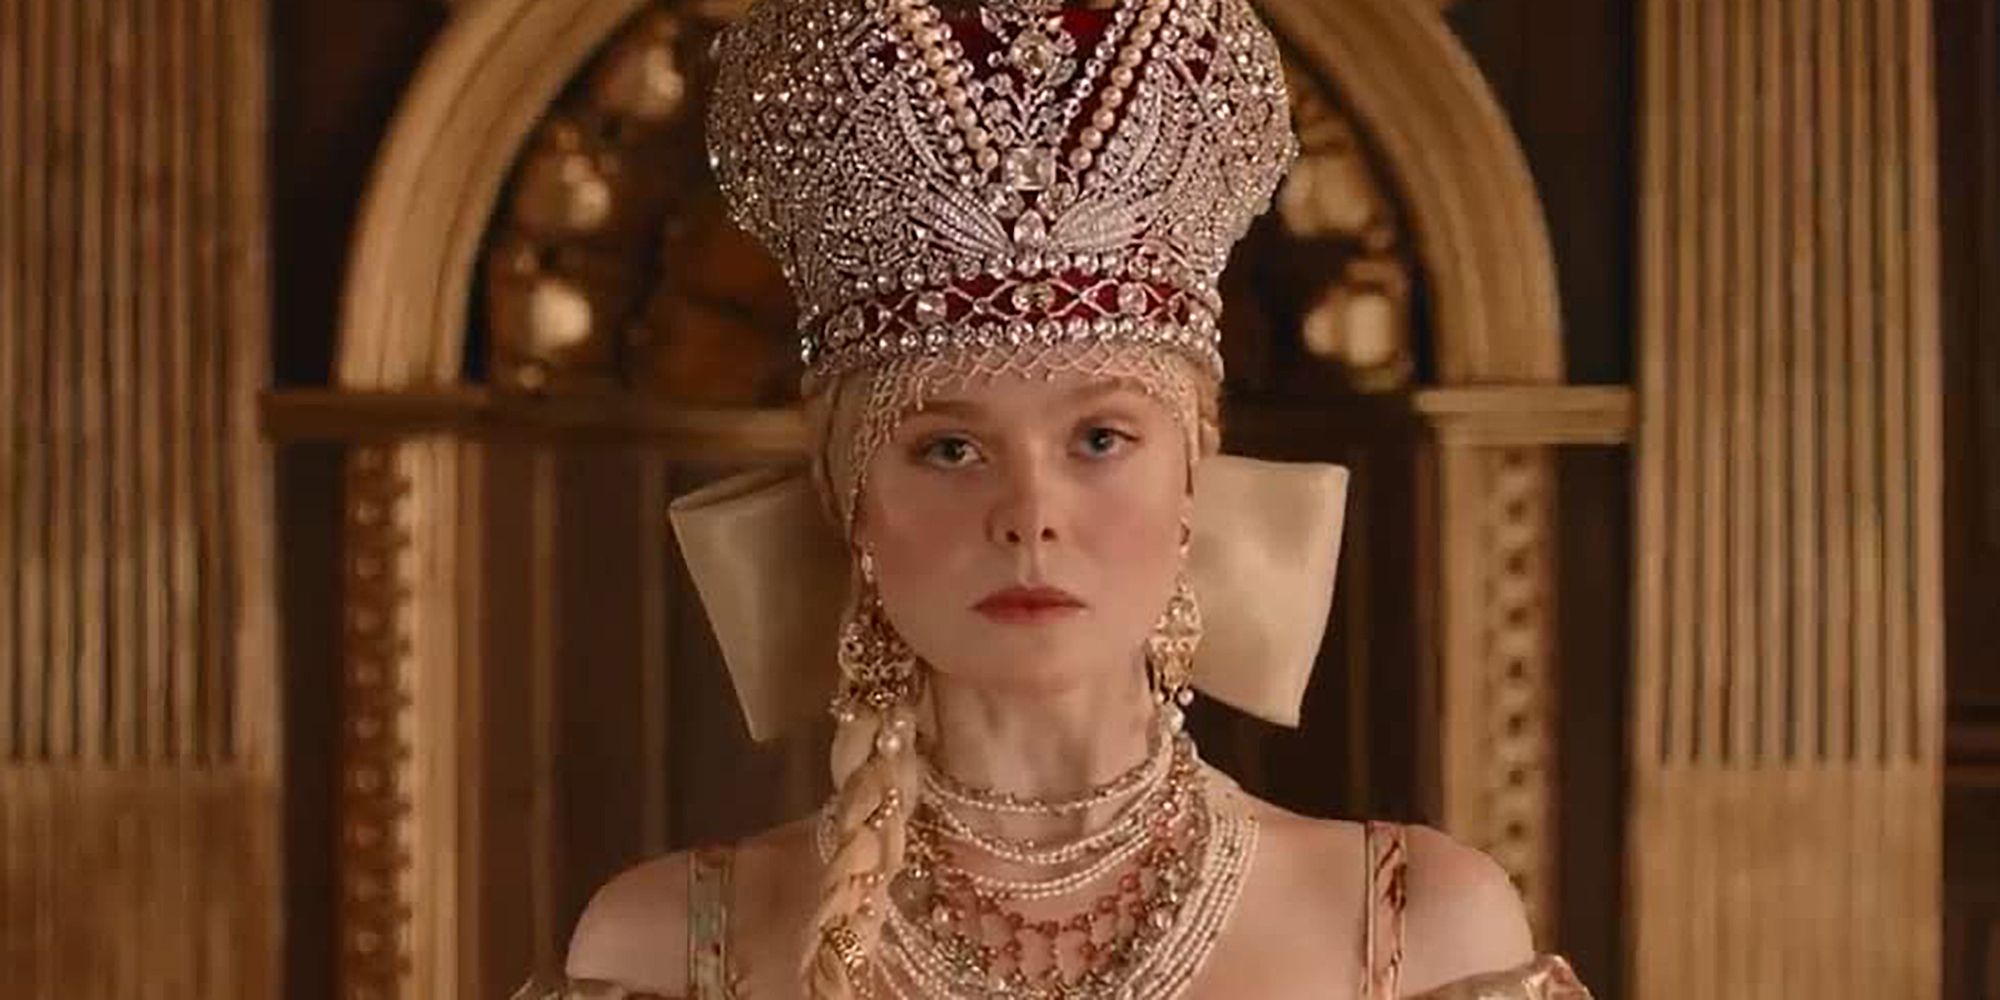 Catherine (Elle Fanning) overthrows Peter and ascends the throne